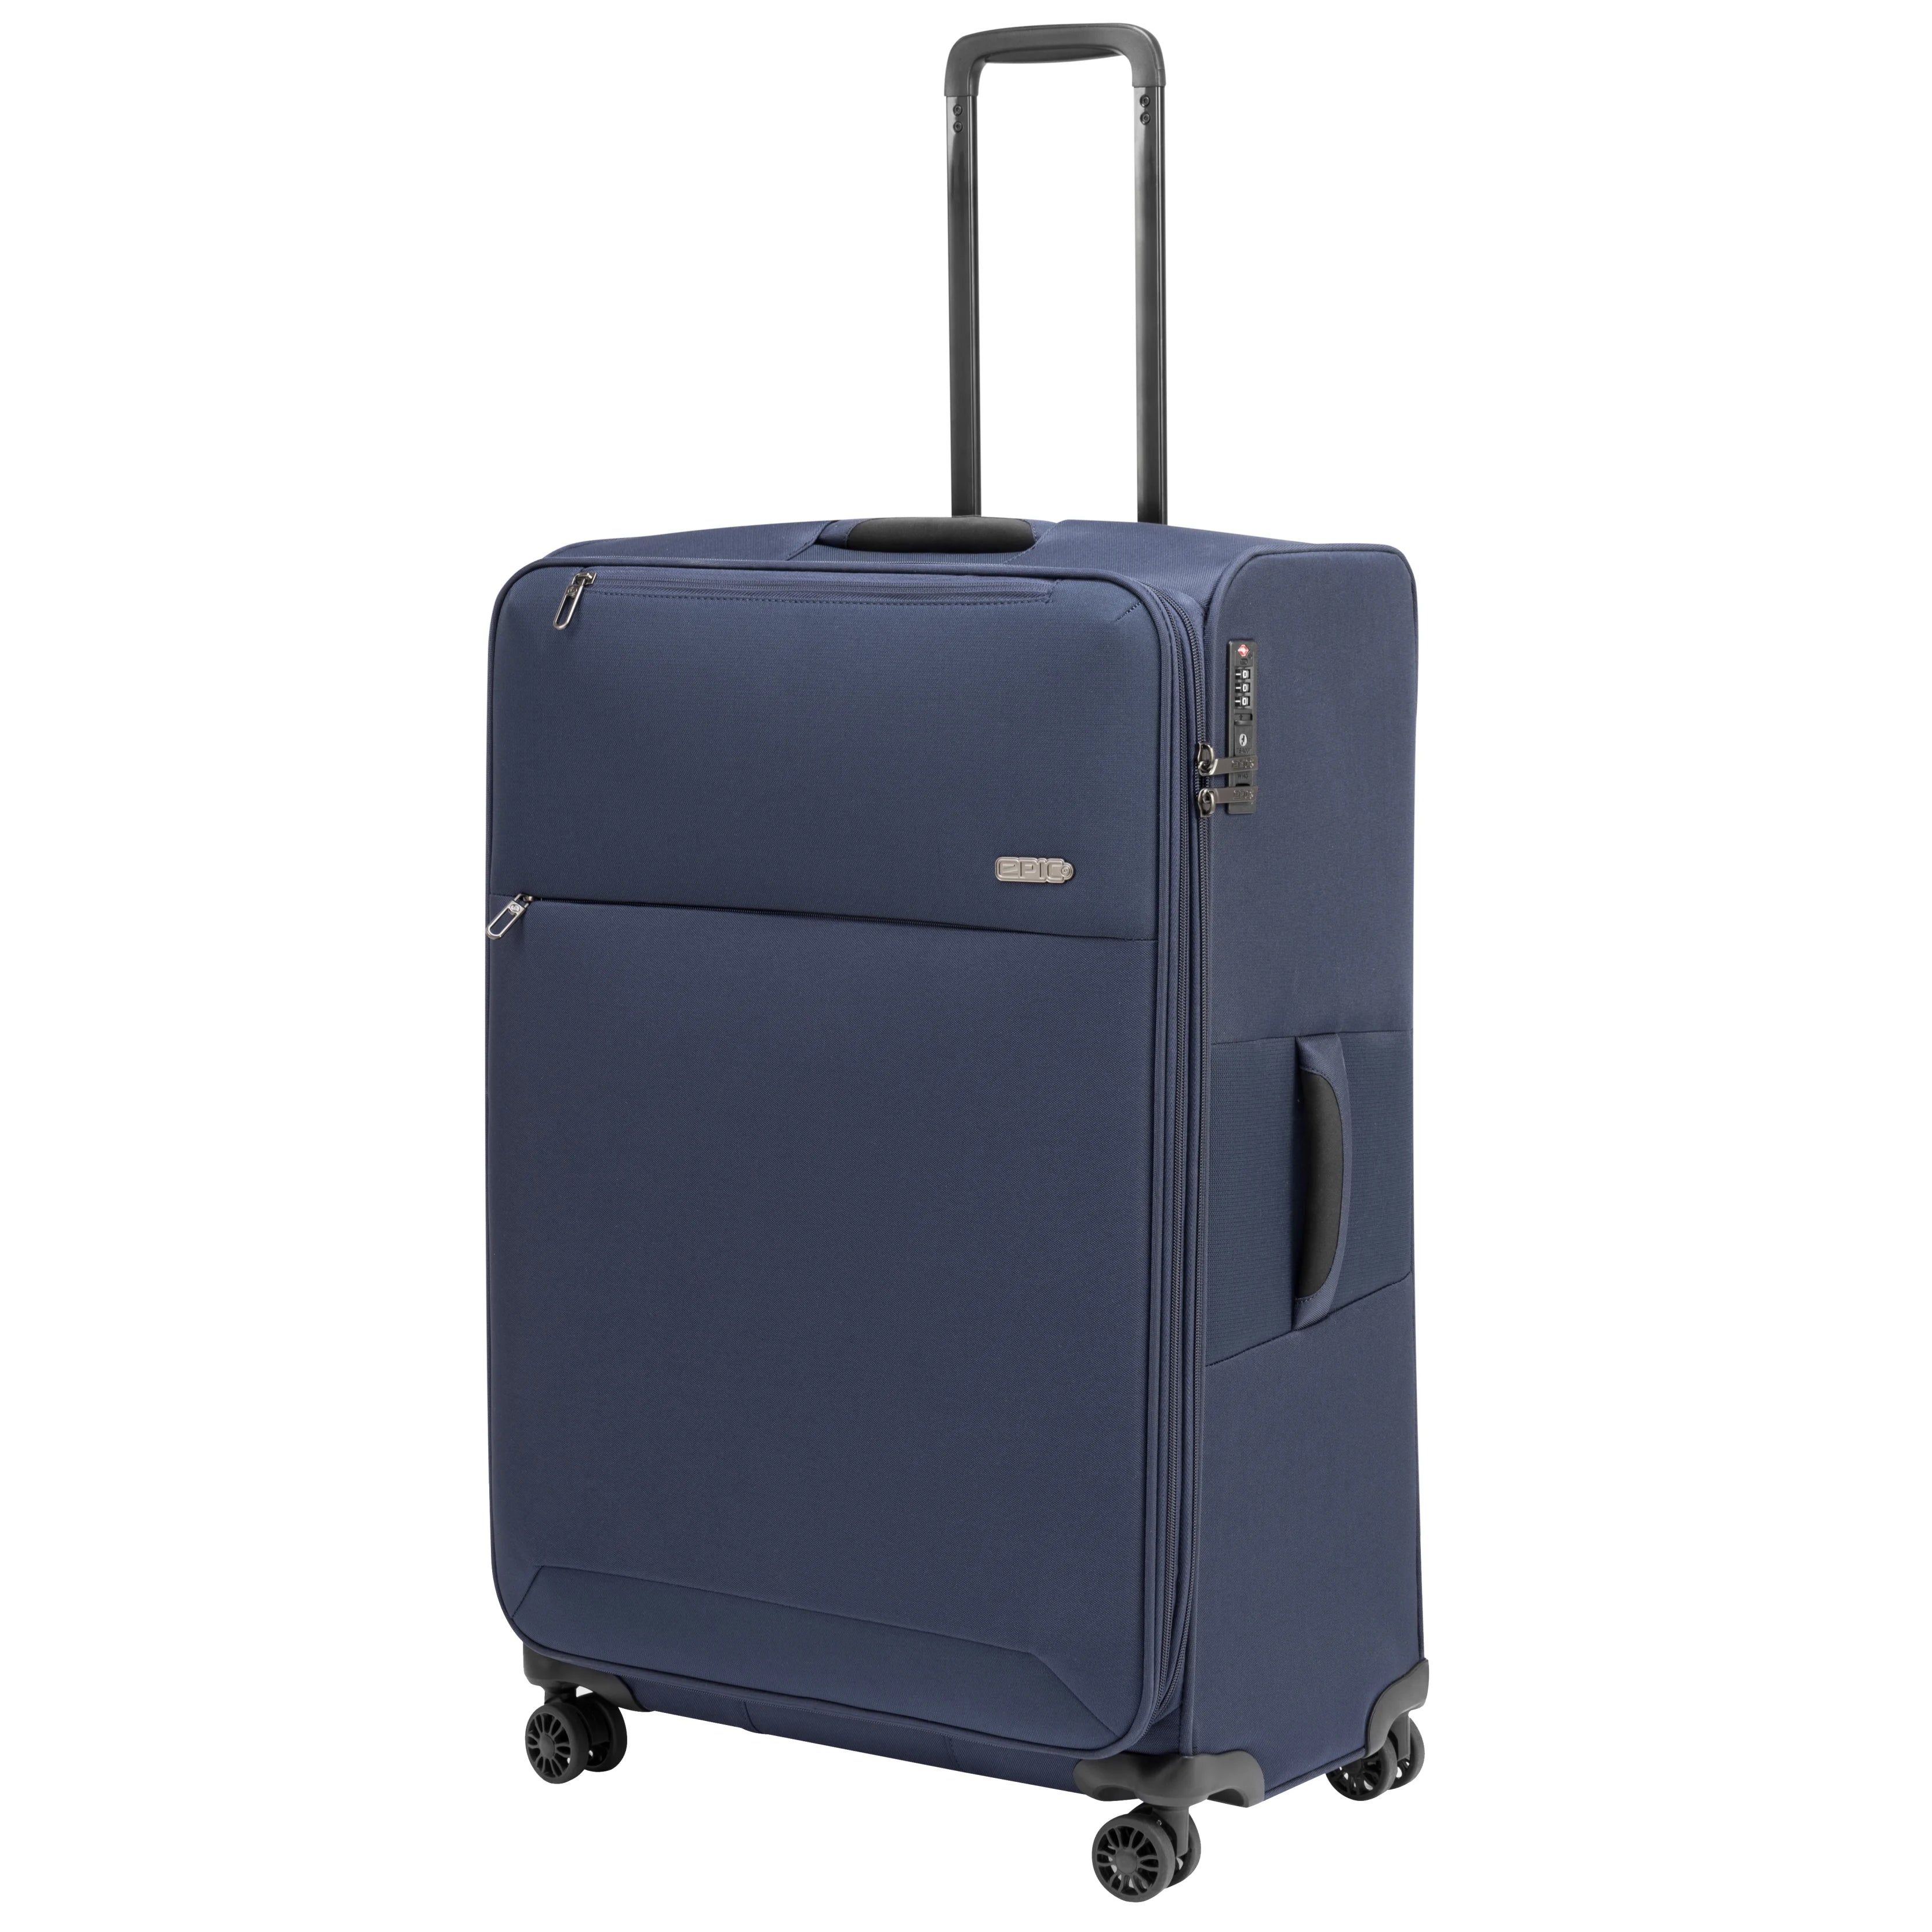 Epic Discovery Neo trolley 4 roues 77 cm - bleu marine